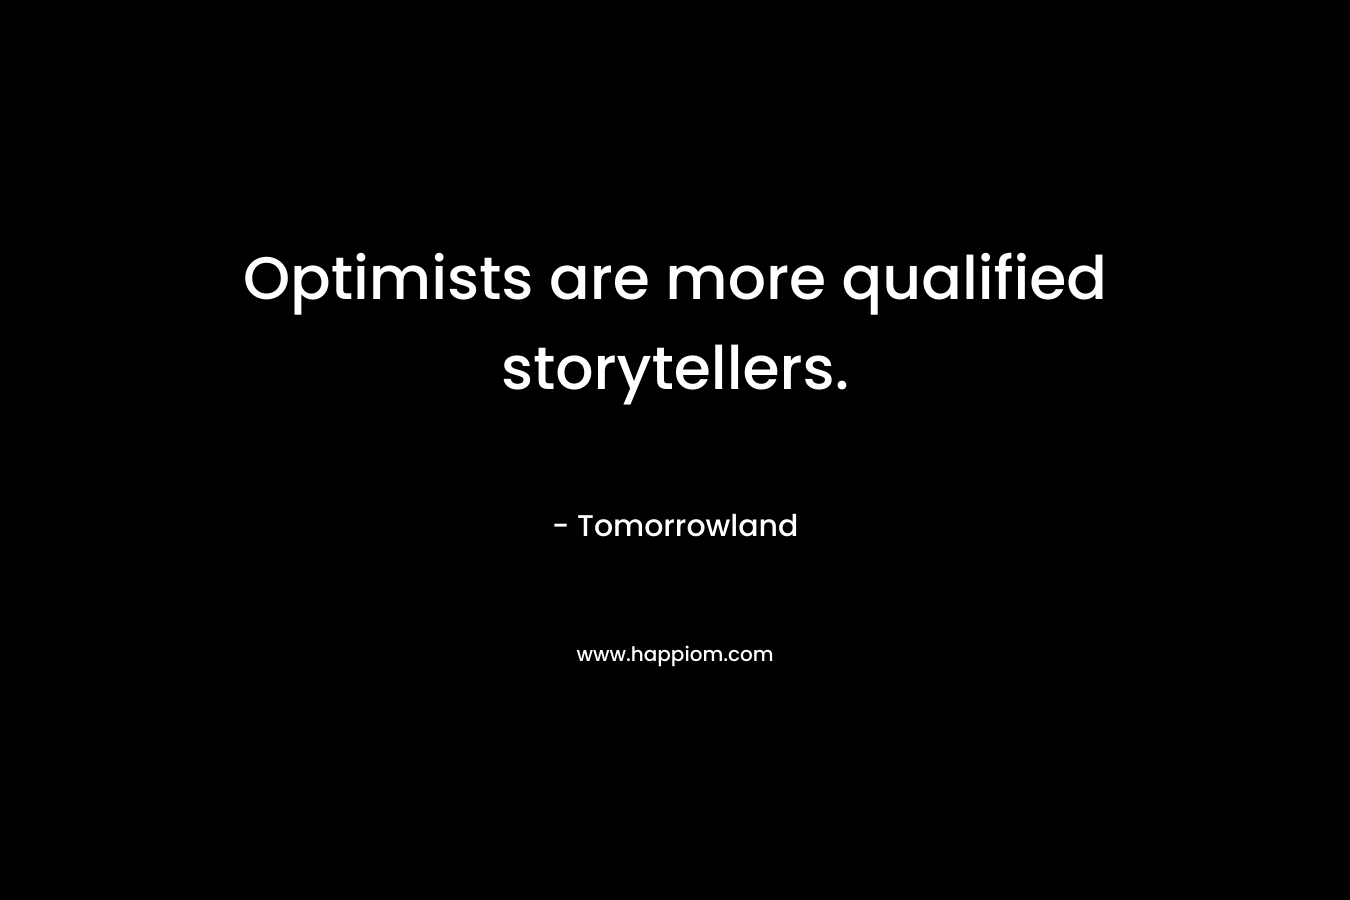 Optimists are more qualified storytellers. – Tomorrowland